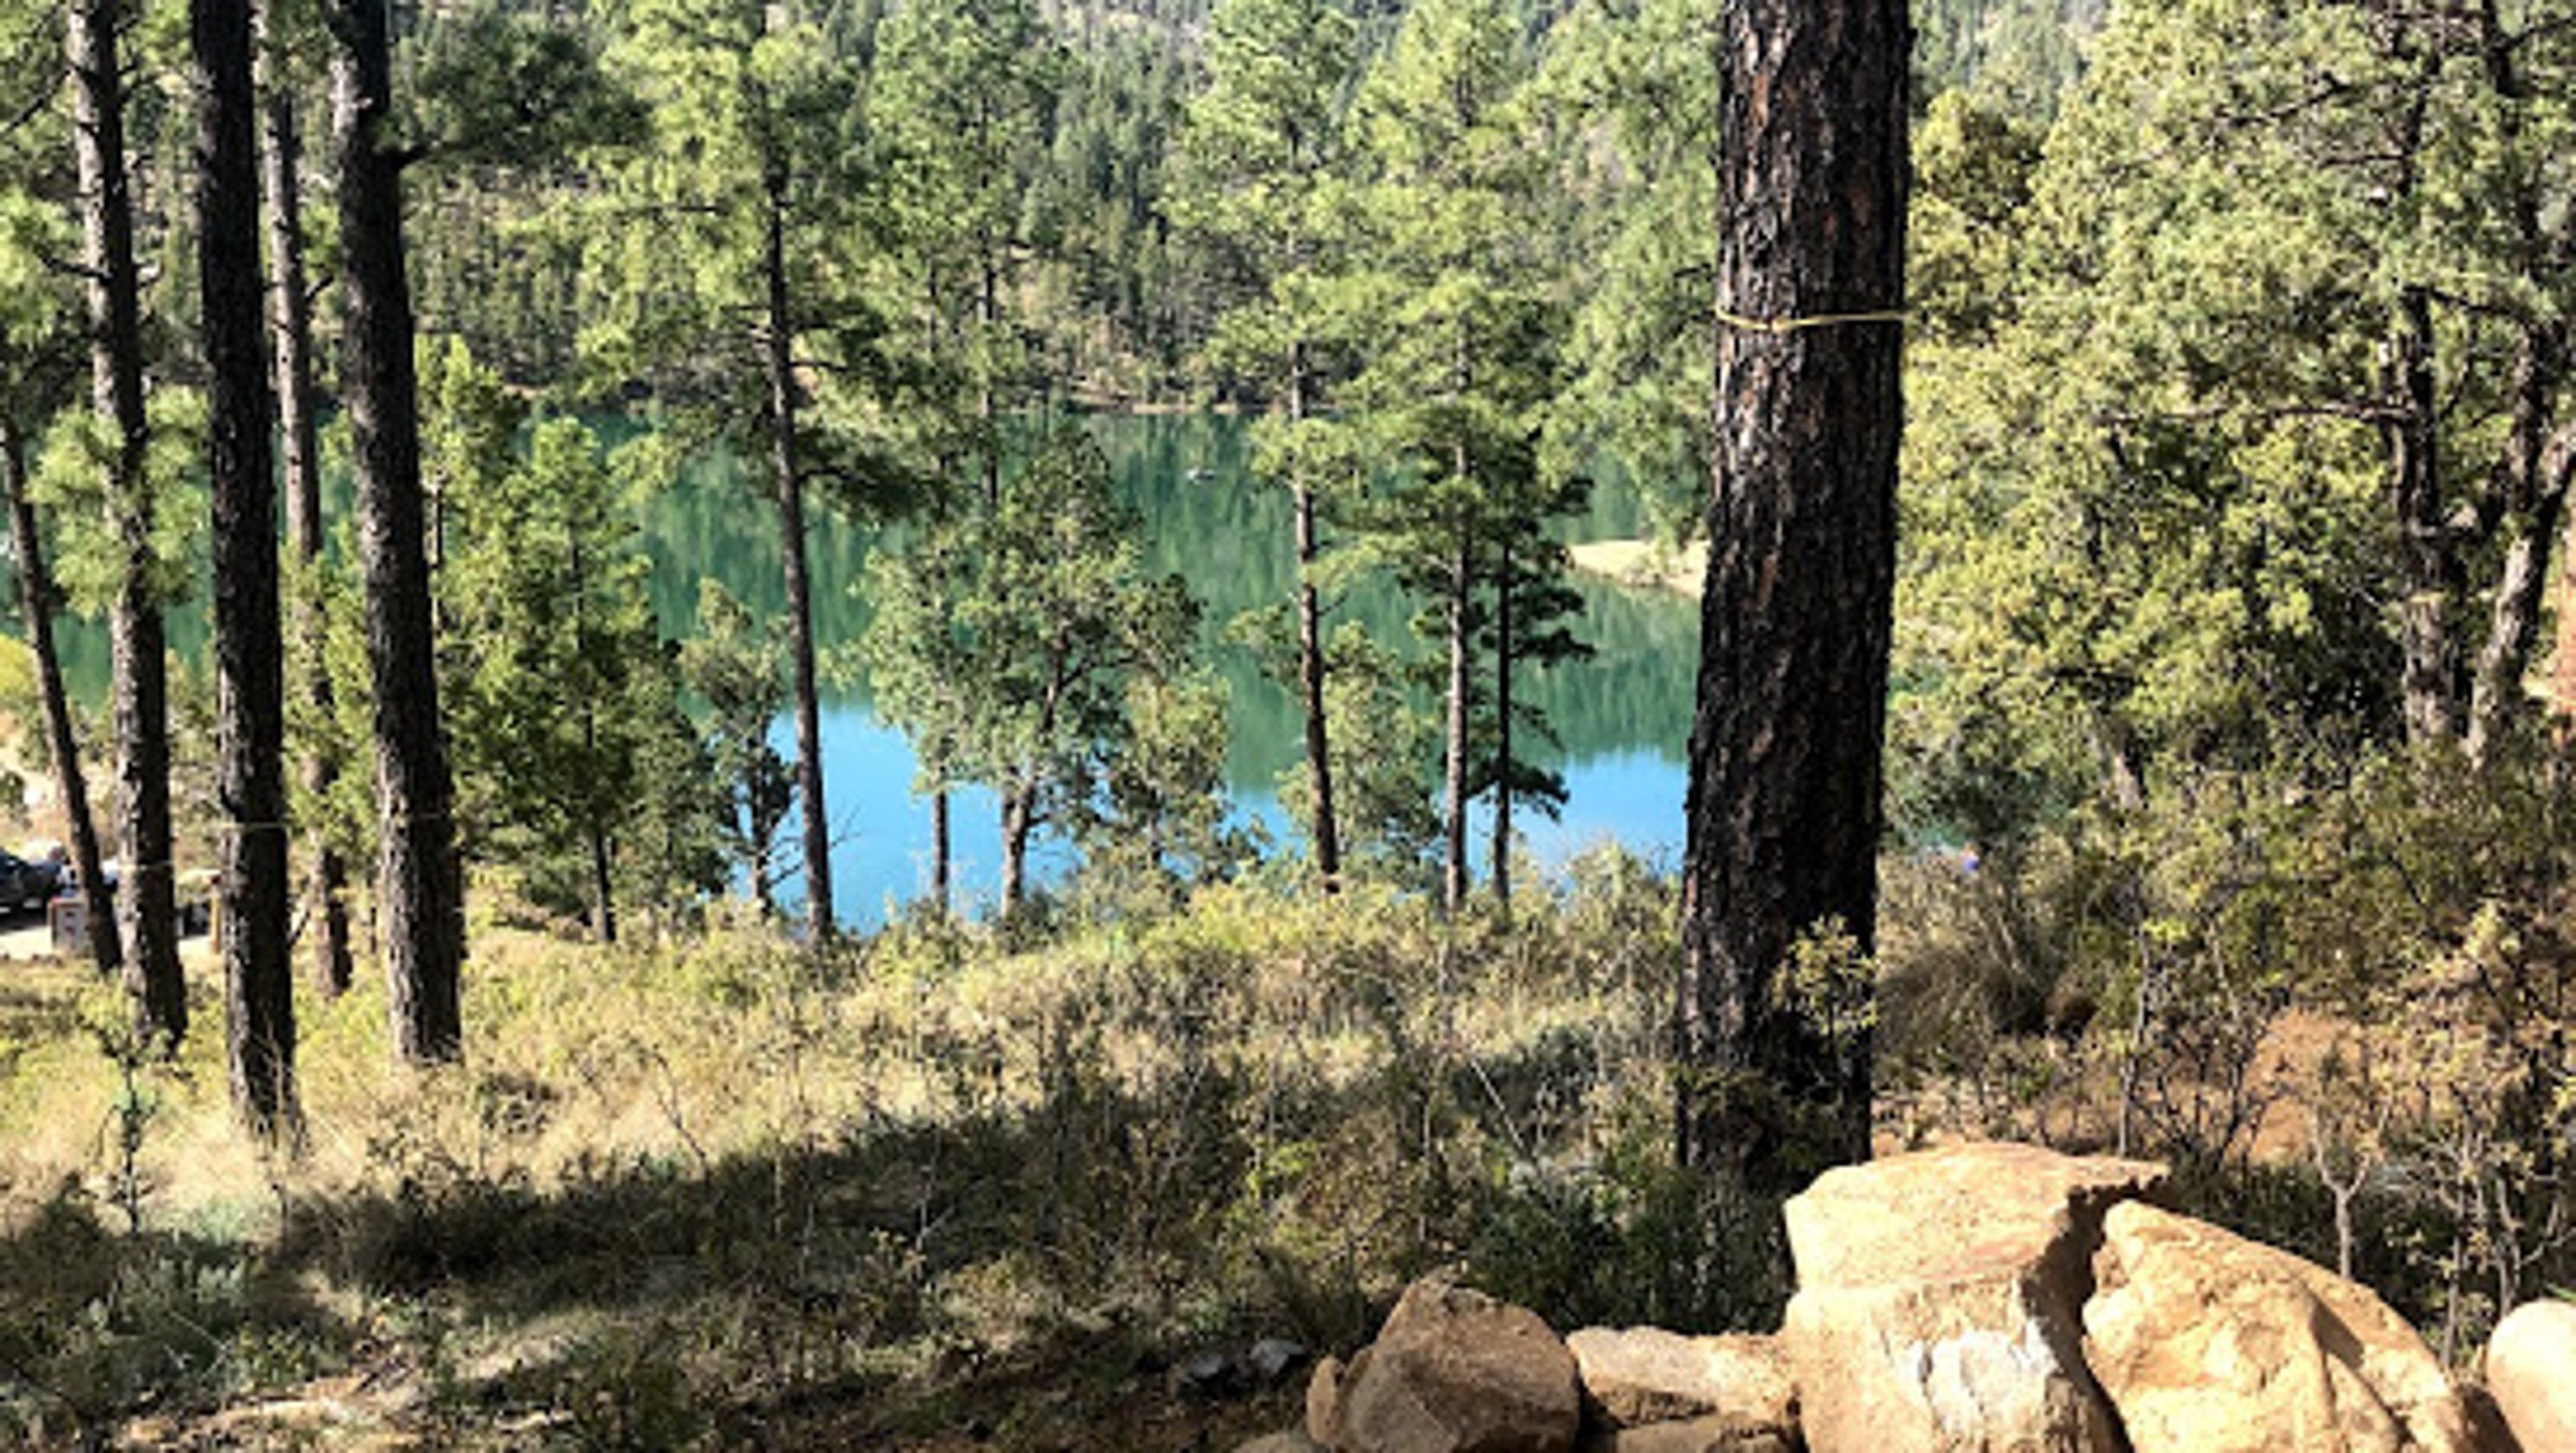 Community meeting: Your chance for a voice in Ruidoso's future - Ruidoso News